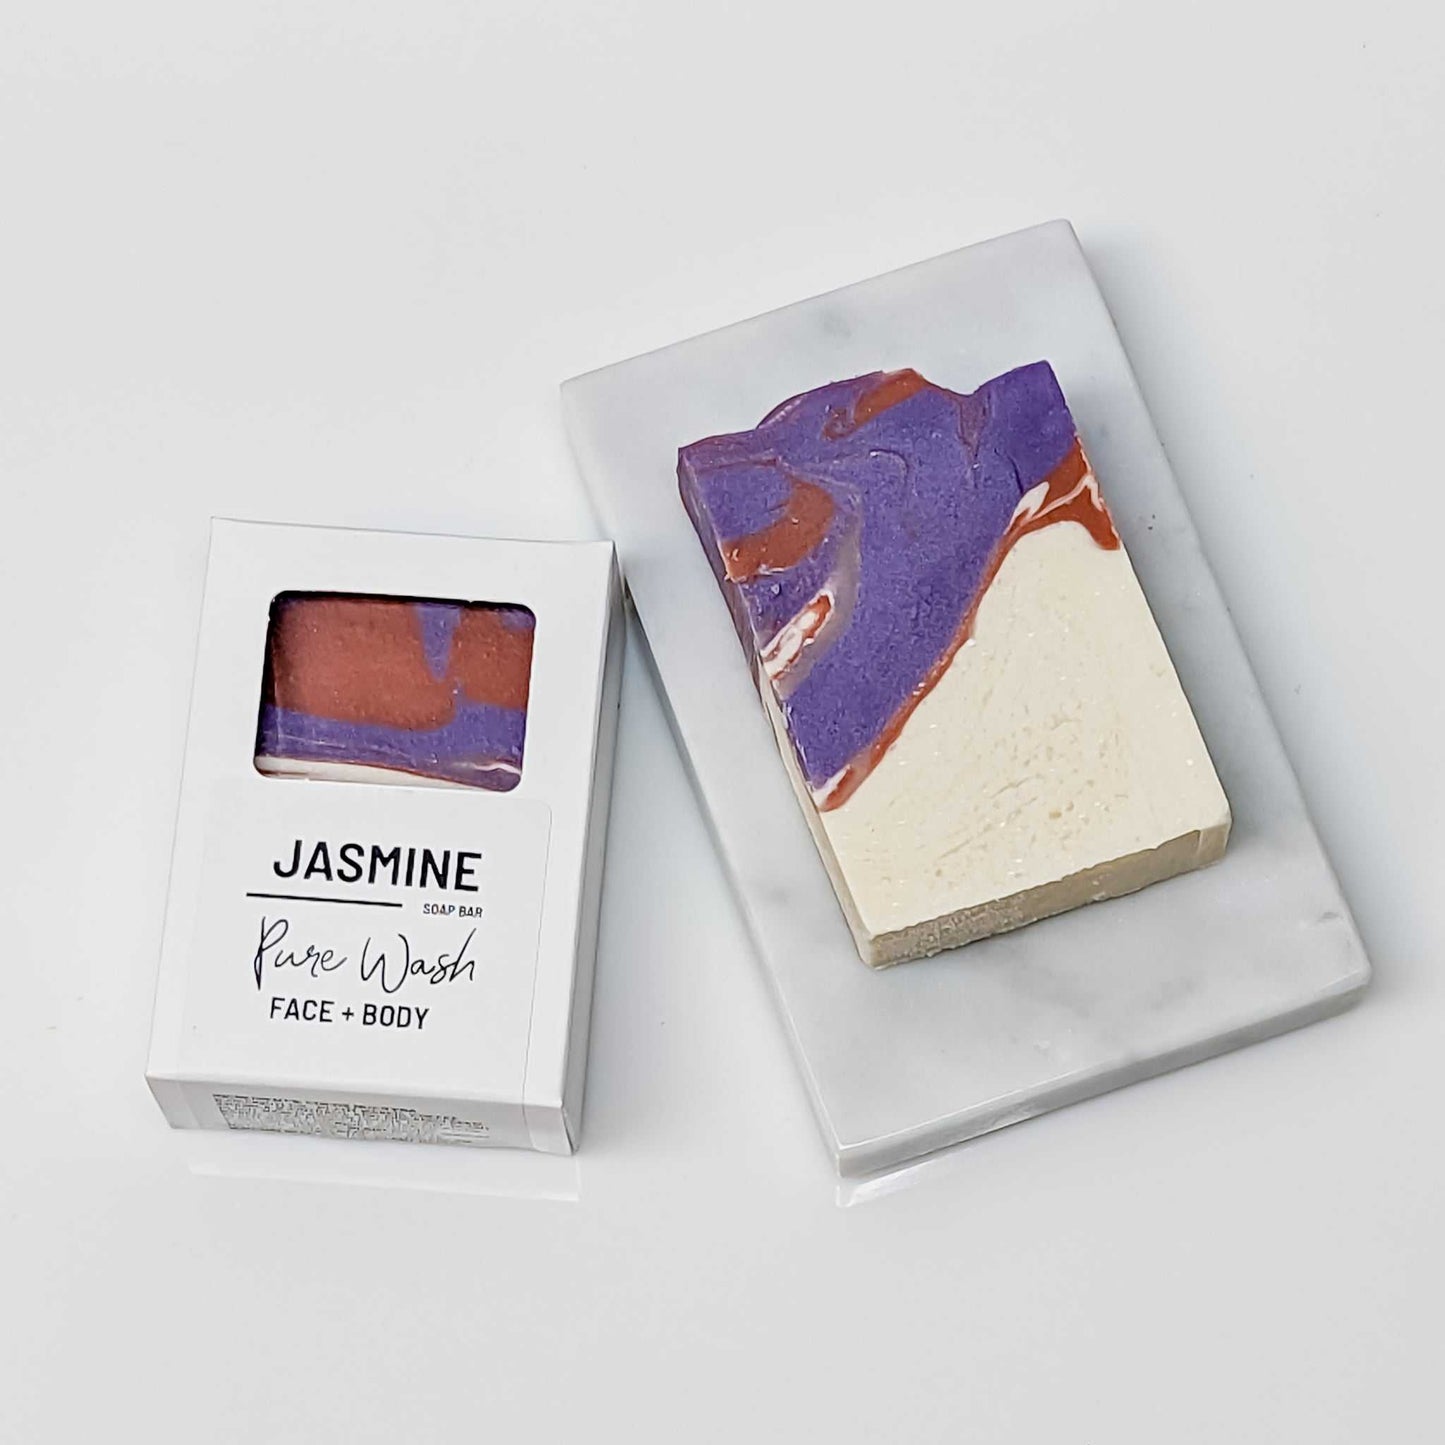 Renewed and revitalized skin awaits: Indulge in the delicate fragrance of our Jasmine Soap Bar | CG Pure Wash